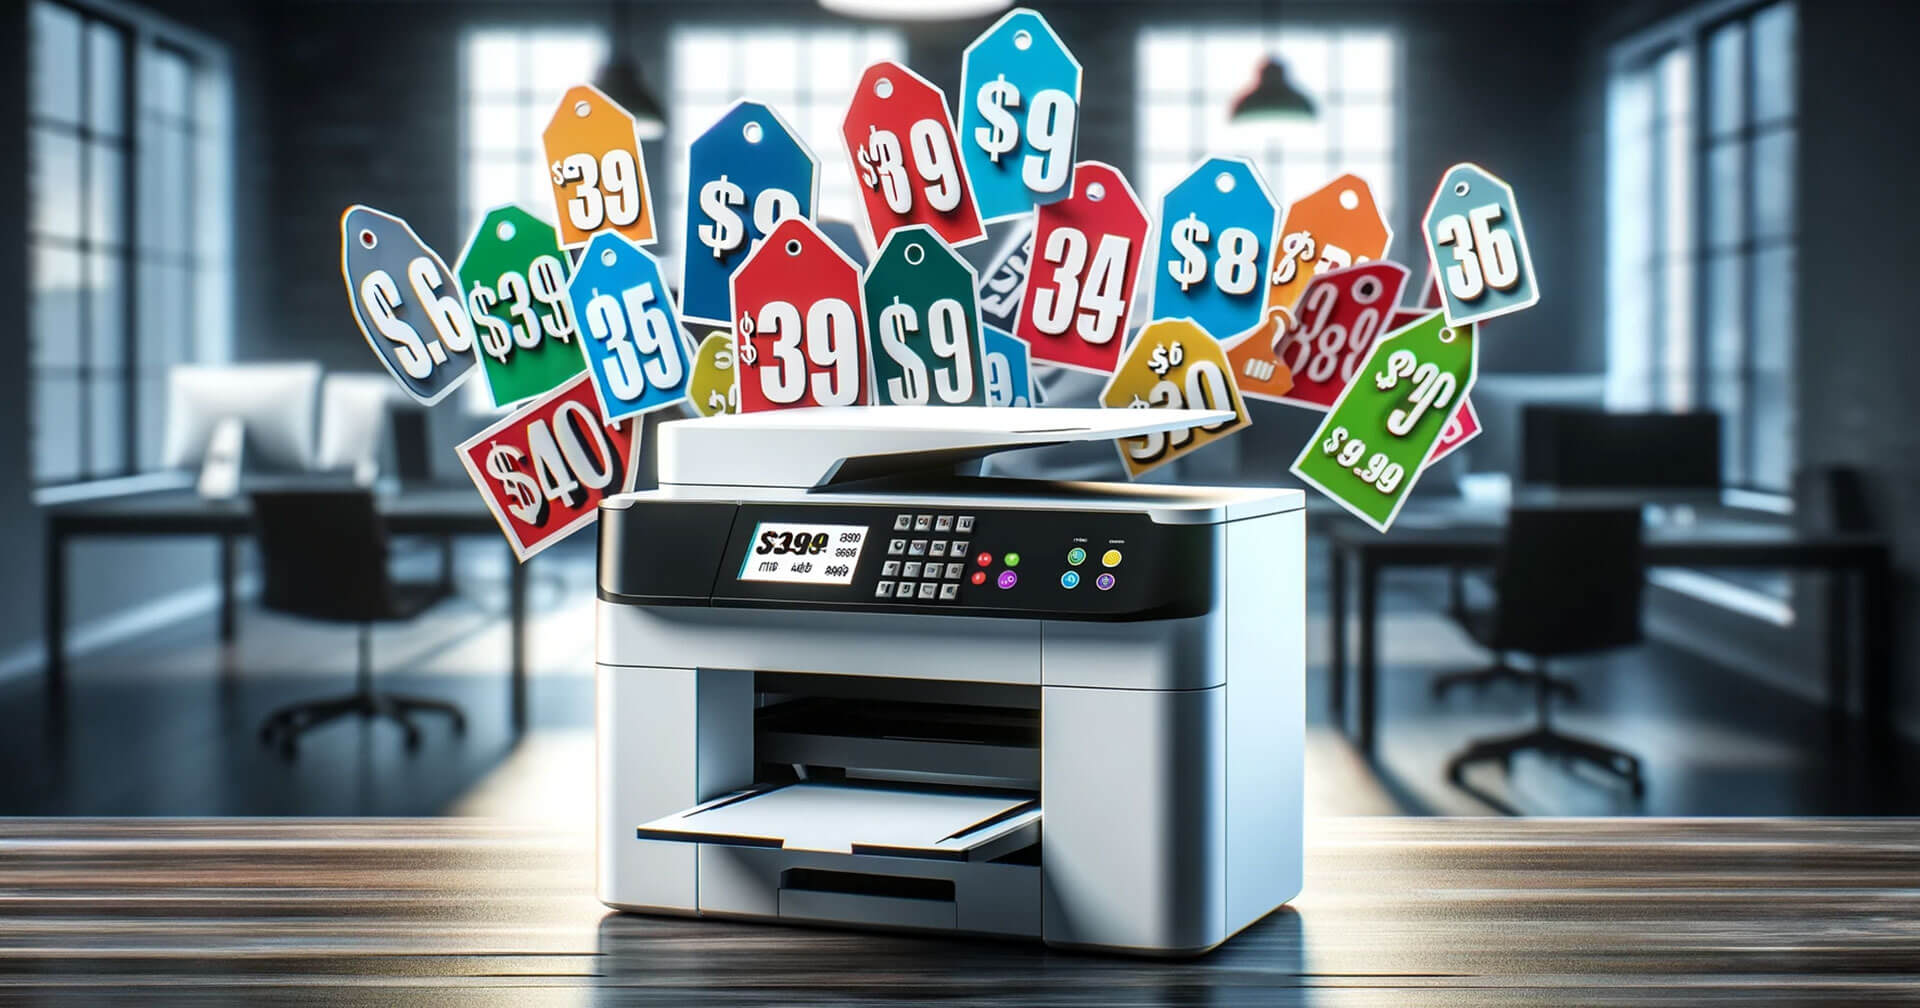 A printer with various price tags on it, showcasing the range of printer cost options available.